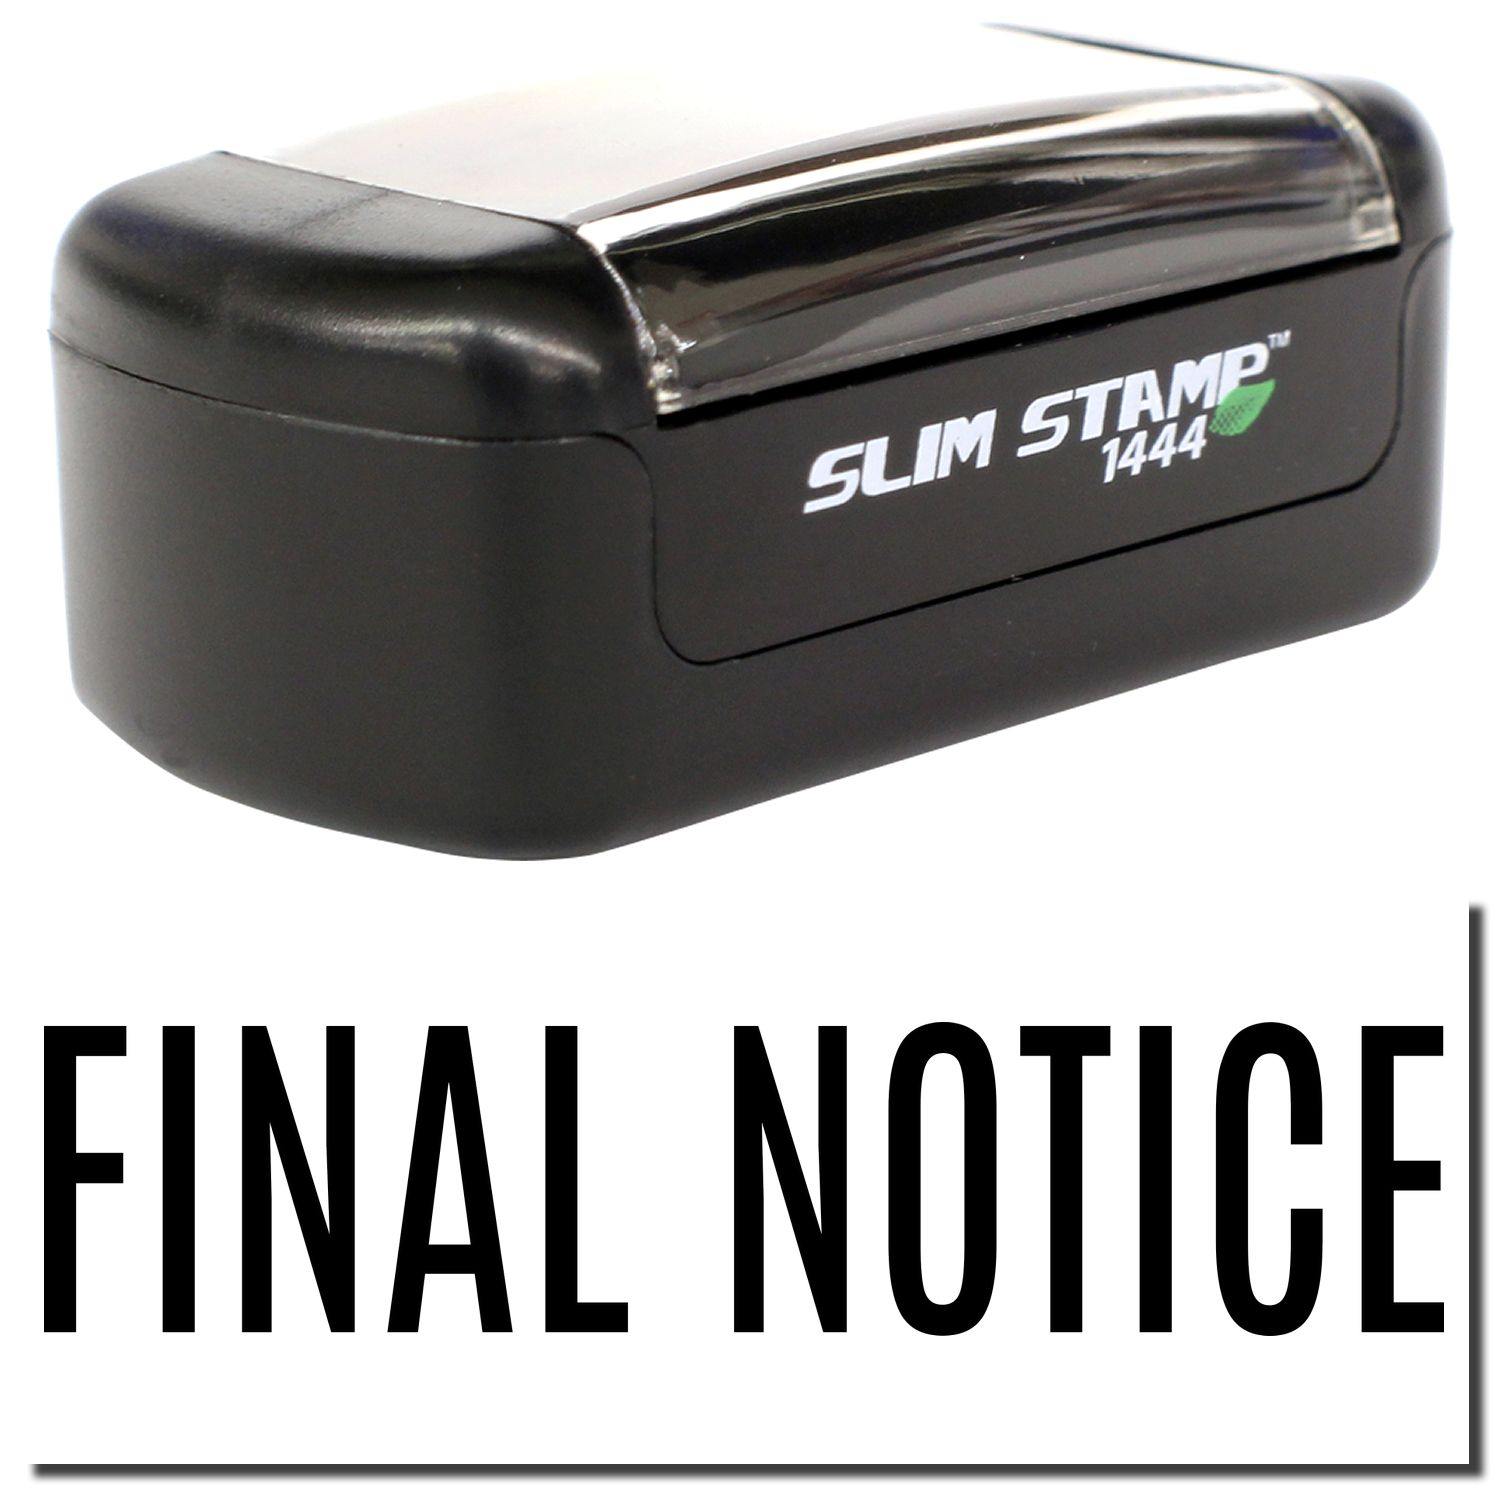 A stock office pre-inked stamp with a stamped image showing how the text "FINAL NOTICE" in a narrow font is displayed after stamping.